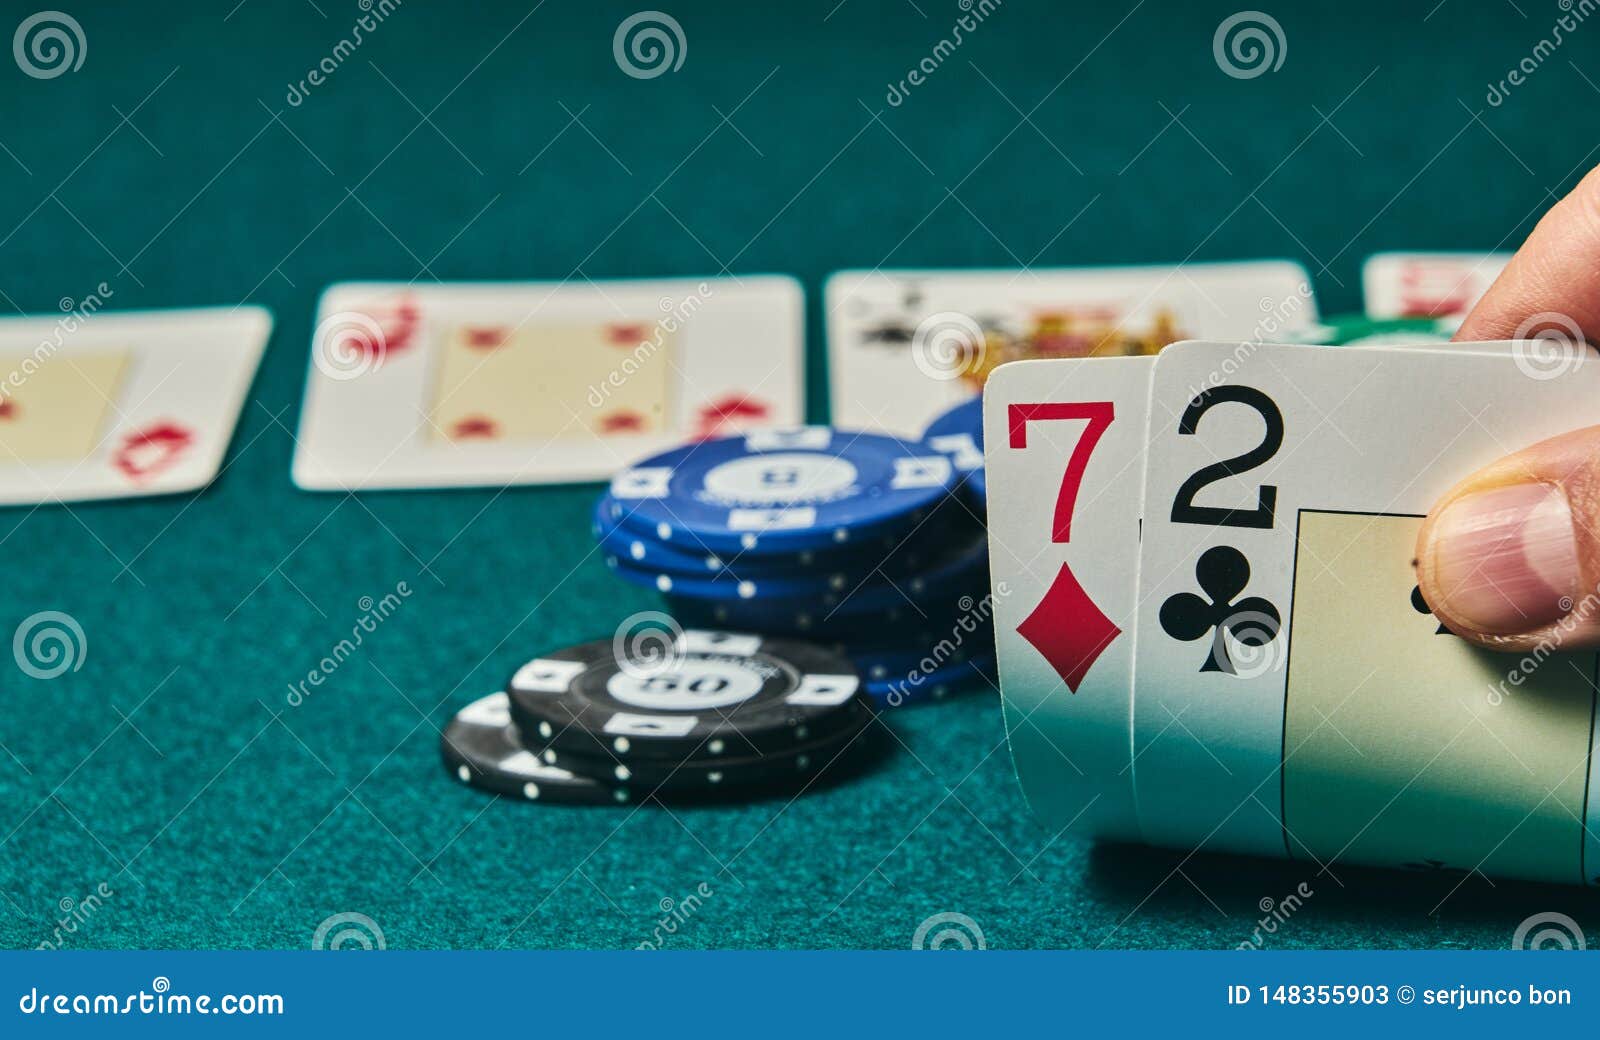 historic Enrichment gloss Bad Poker Gamble or Unlucky Hand Concept with Player Going All in with 2  and 7 Two and Seven Offsuit Also Called Unsuited, Stock Image - Image of  gambler, careless: 148355903